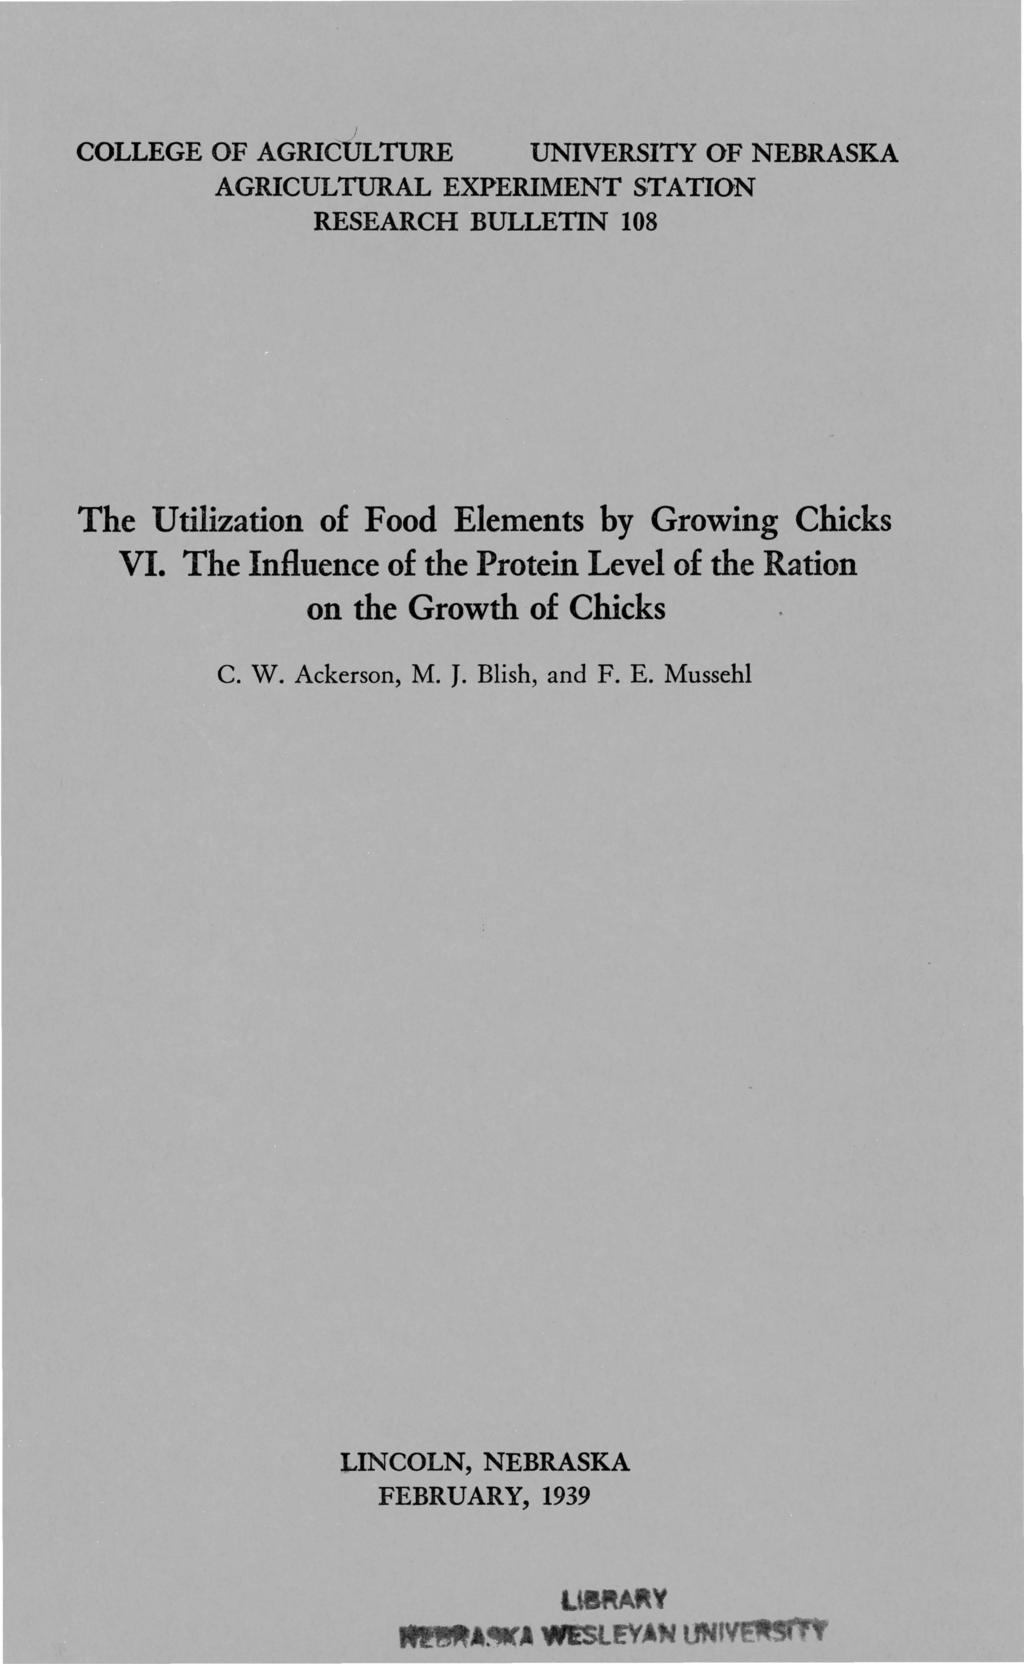 , COLLEGE OF AGRICULTURE UNIVERSITY OF NEBRASKA AGRICULTURAL EXPERIMENT STATION RESEARCH BULLETIN 108 The Utilization of Food Elements by Growing Chicks